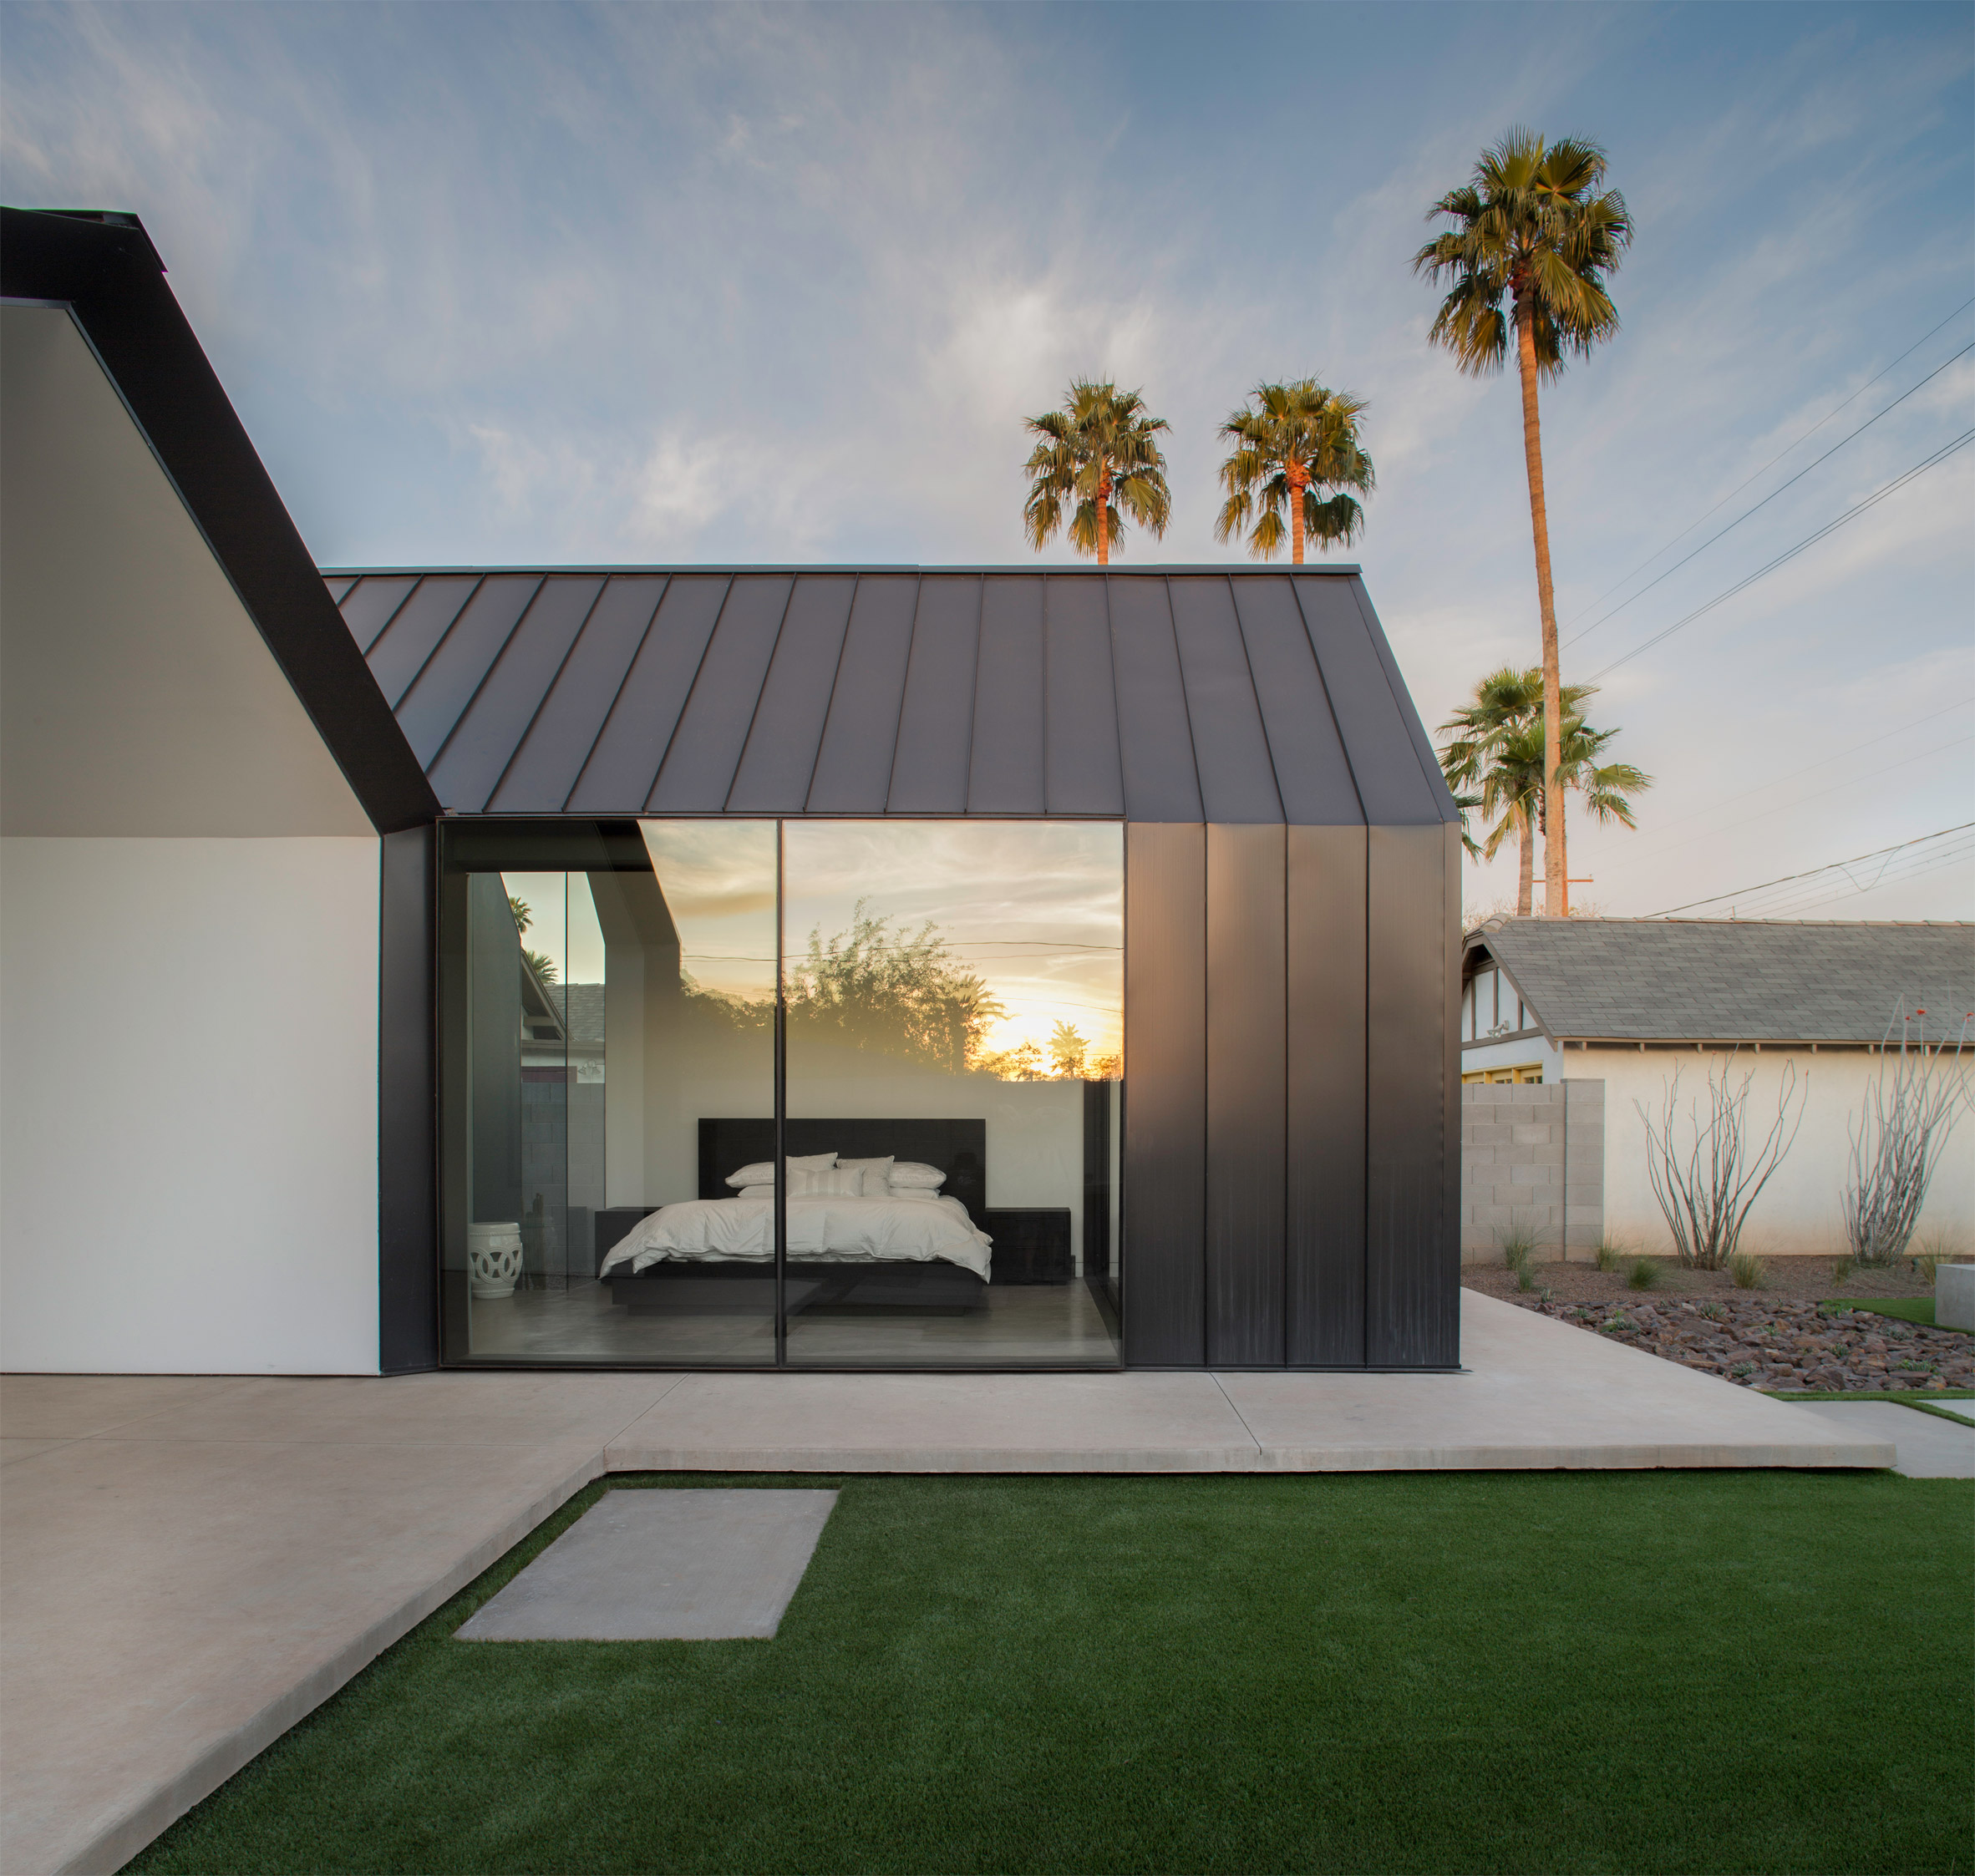 Chen + Suchart creates a gabled addition clad in metal for an historic Arizona home